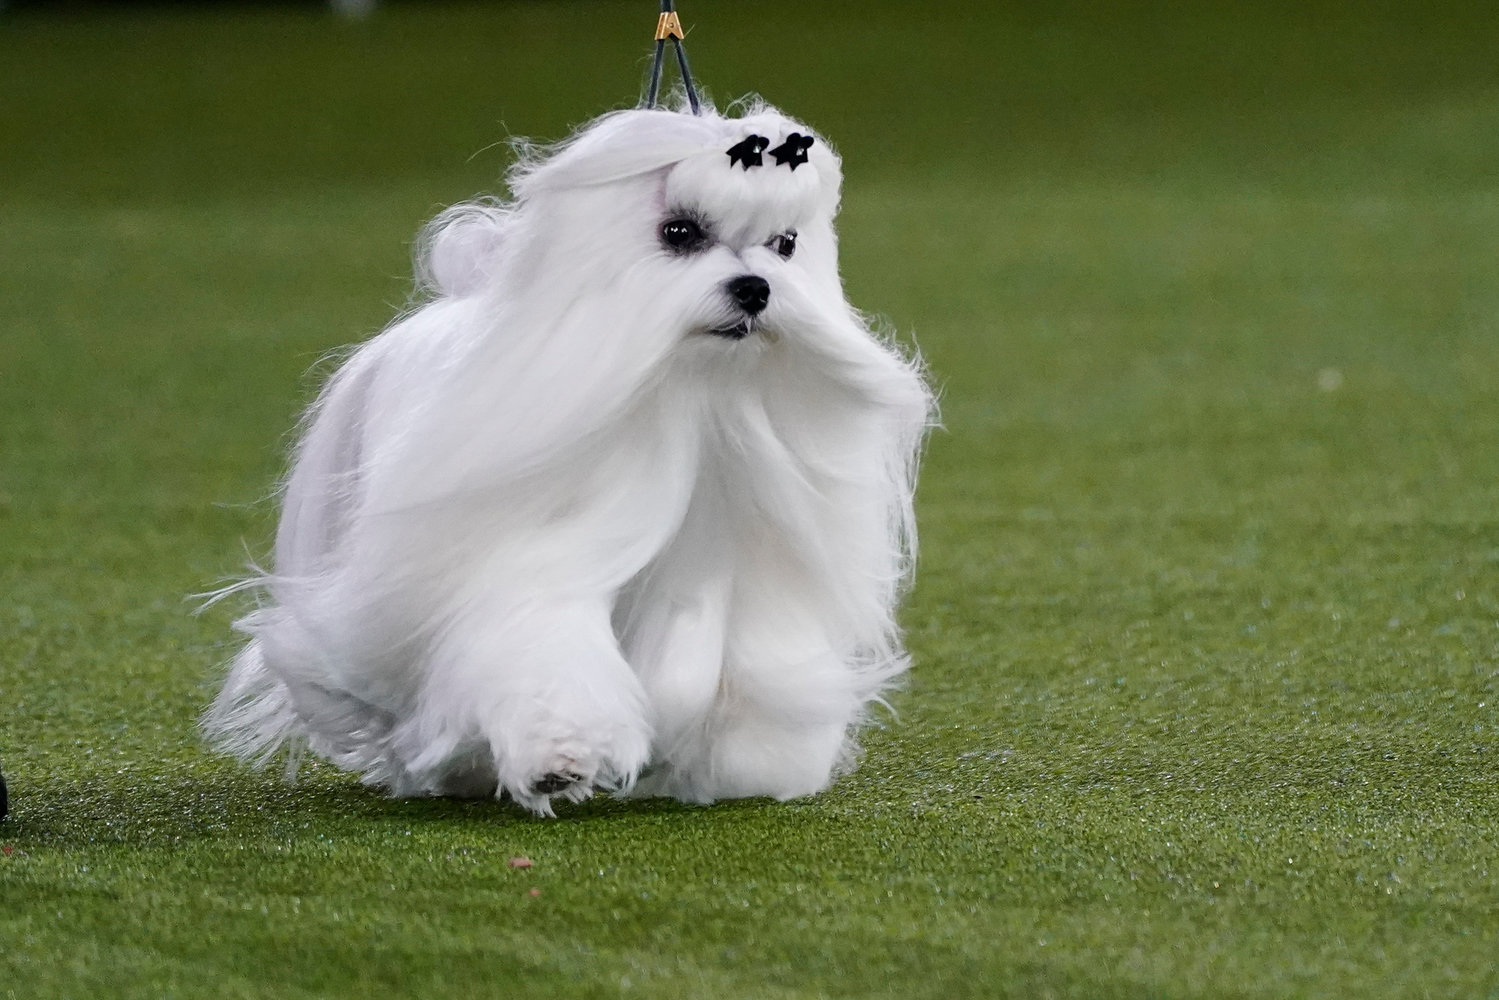 Hollywood, a Maltese ,competes for best in show at the 146th Westminster Kennel Club Dog Show, Wednesday, June 22, 2022, in Tarrytown, N.Y. (AP Photo/Frank Franklin II)